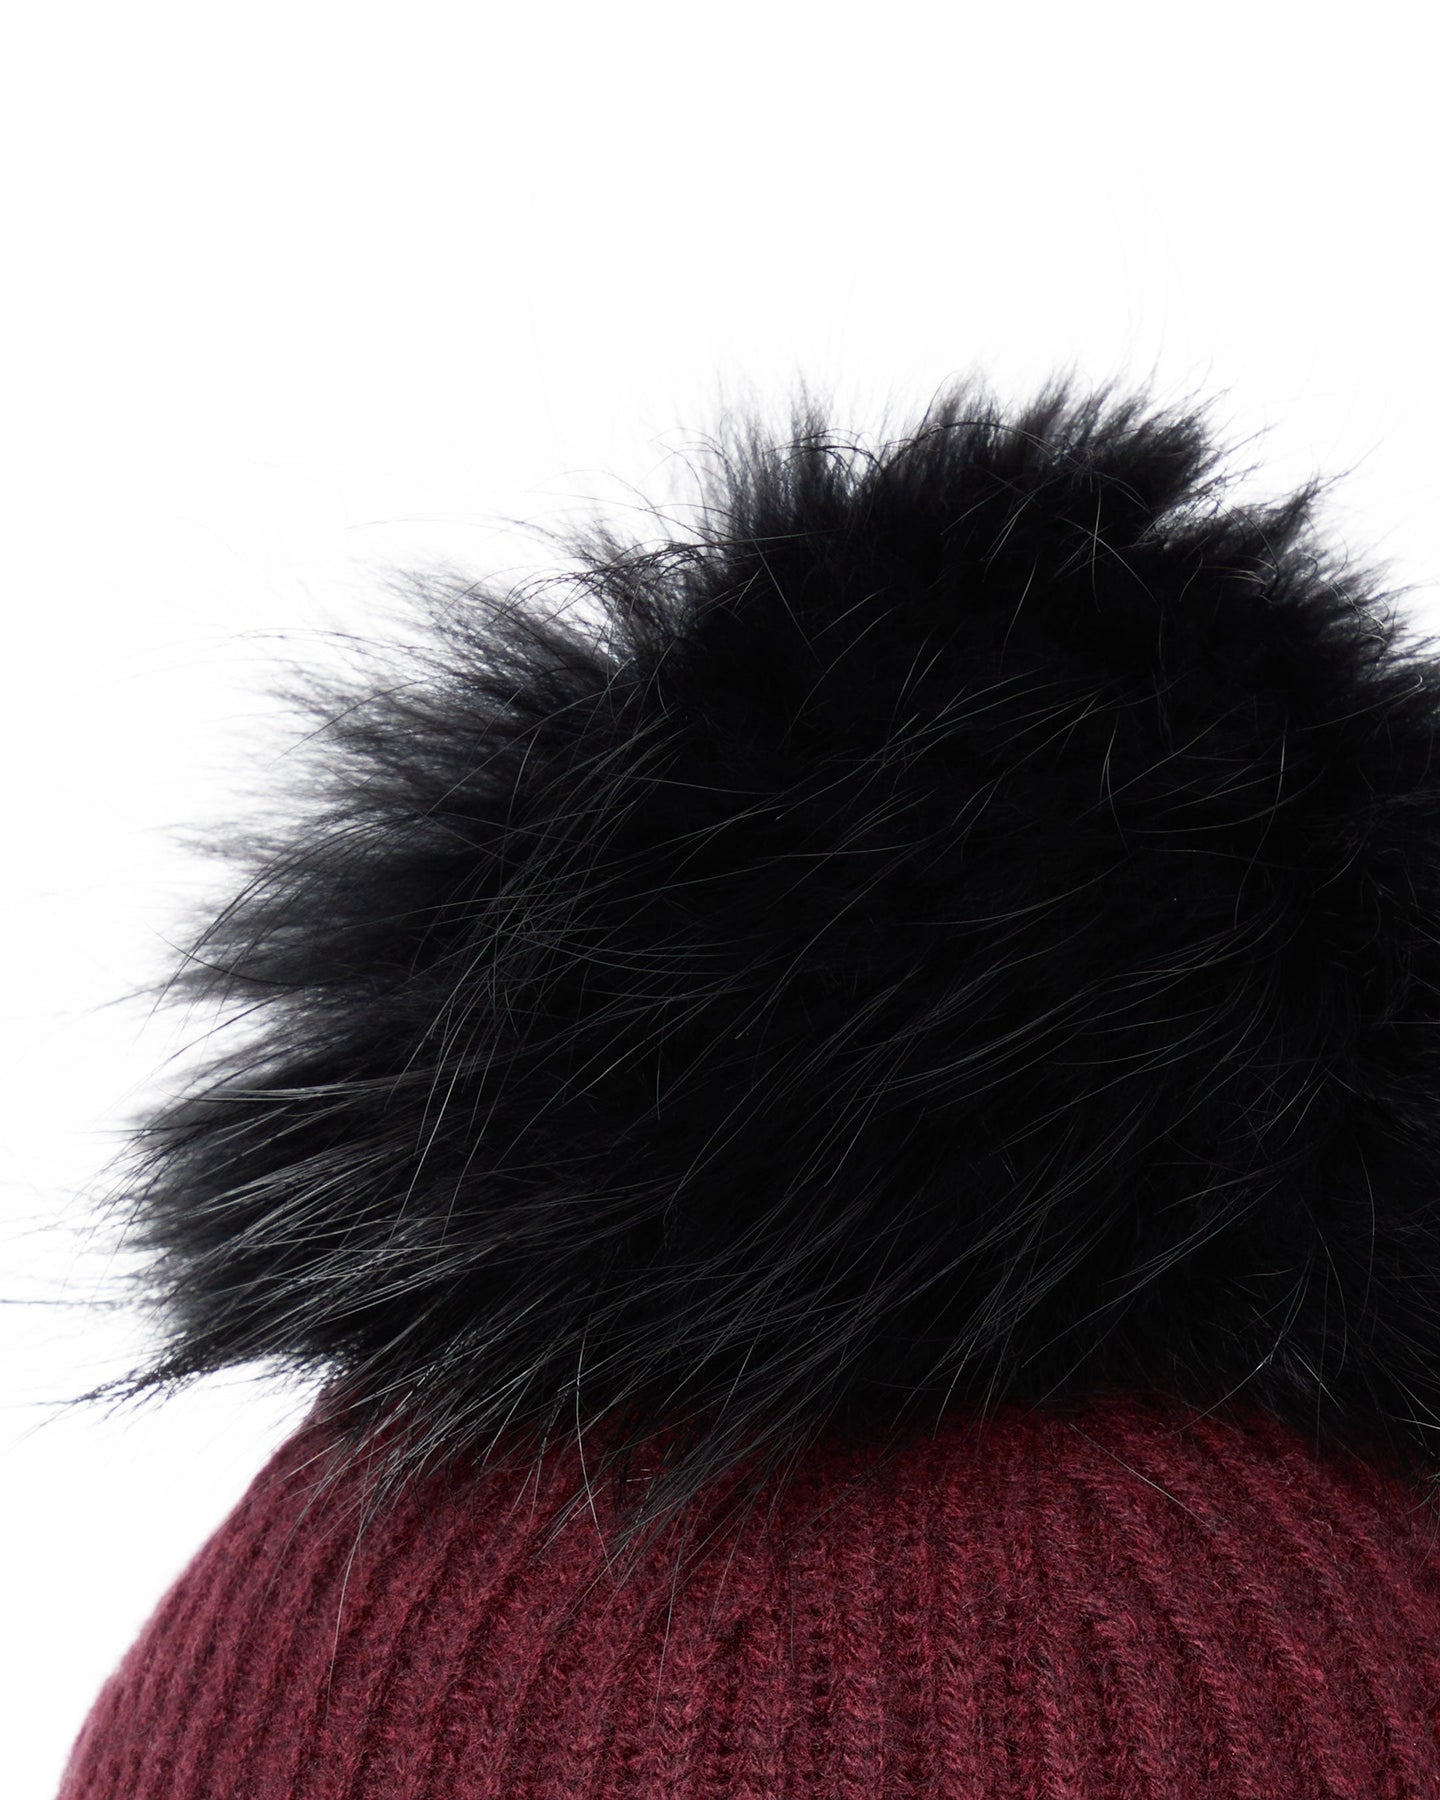 N.Peal Unisex Ribbed Cashmere Hat With Detachable Pom Shiraz Melange Red